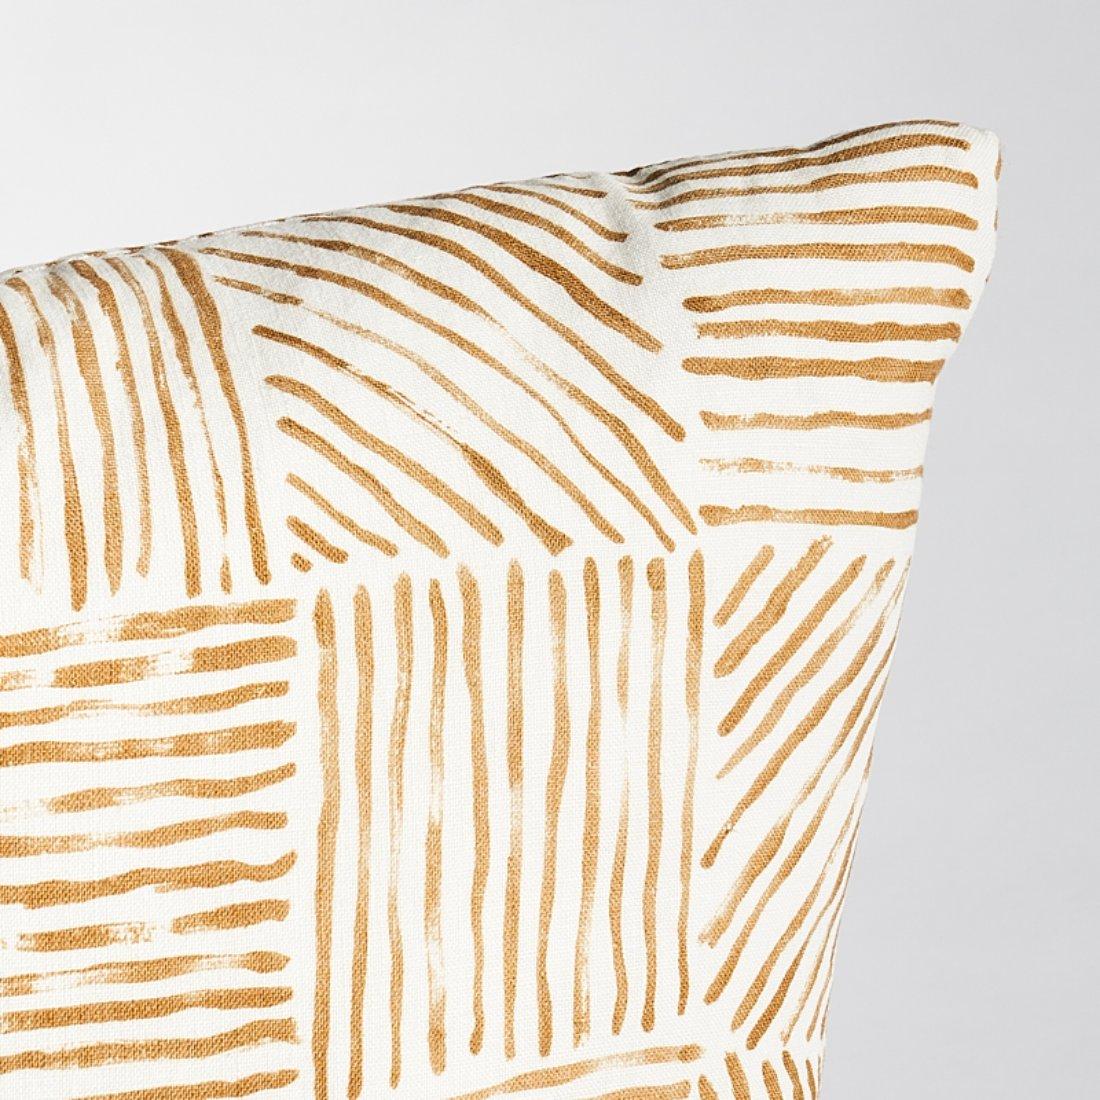 This pillow features Katama by Caroline Z Hurley for Schumacher with a Knife Edge finish. Designed by artist Caroline Z Hurley in her Brooklyn studio, Katama is a deceptively simple linear block pattern that reveals the artist’s brush work. Pillow